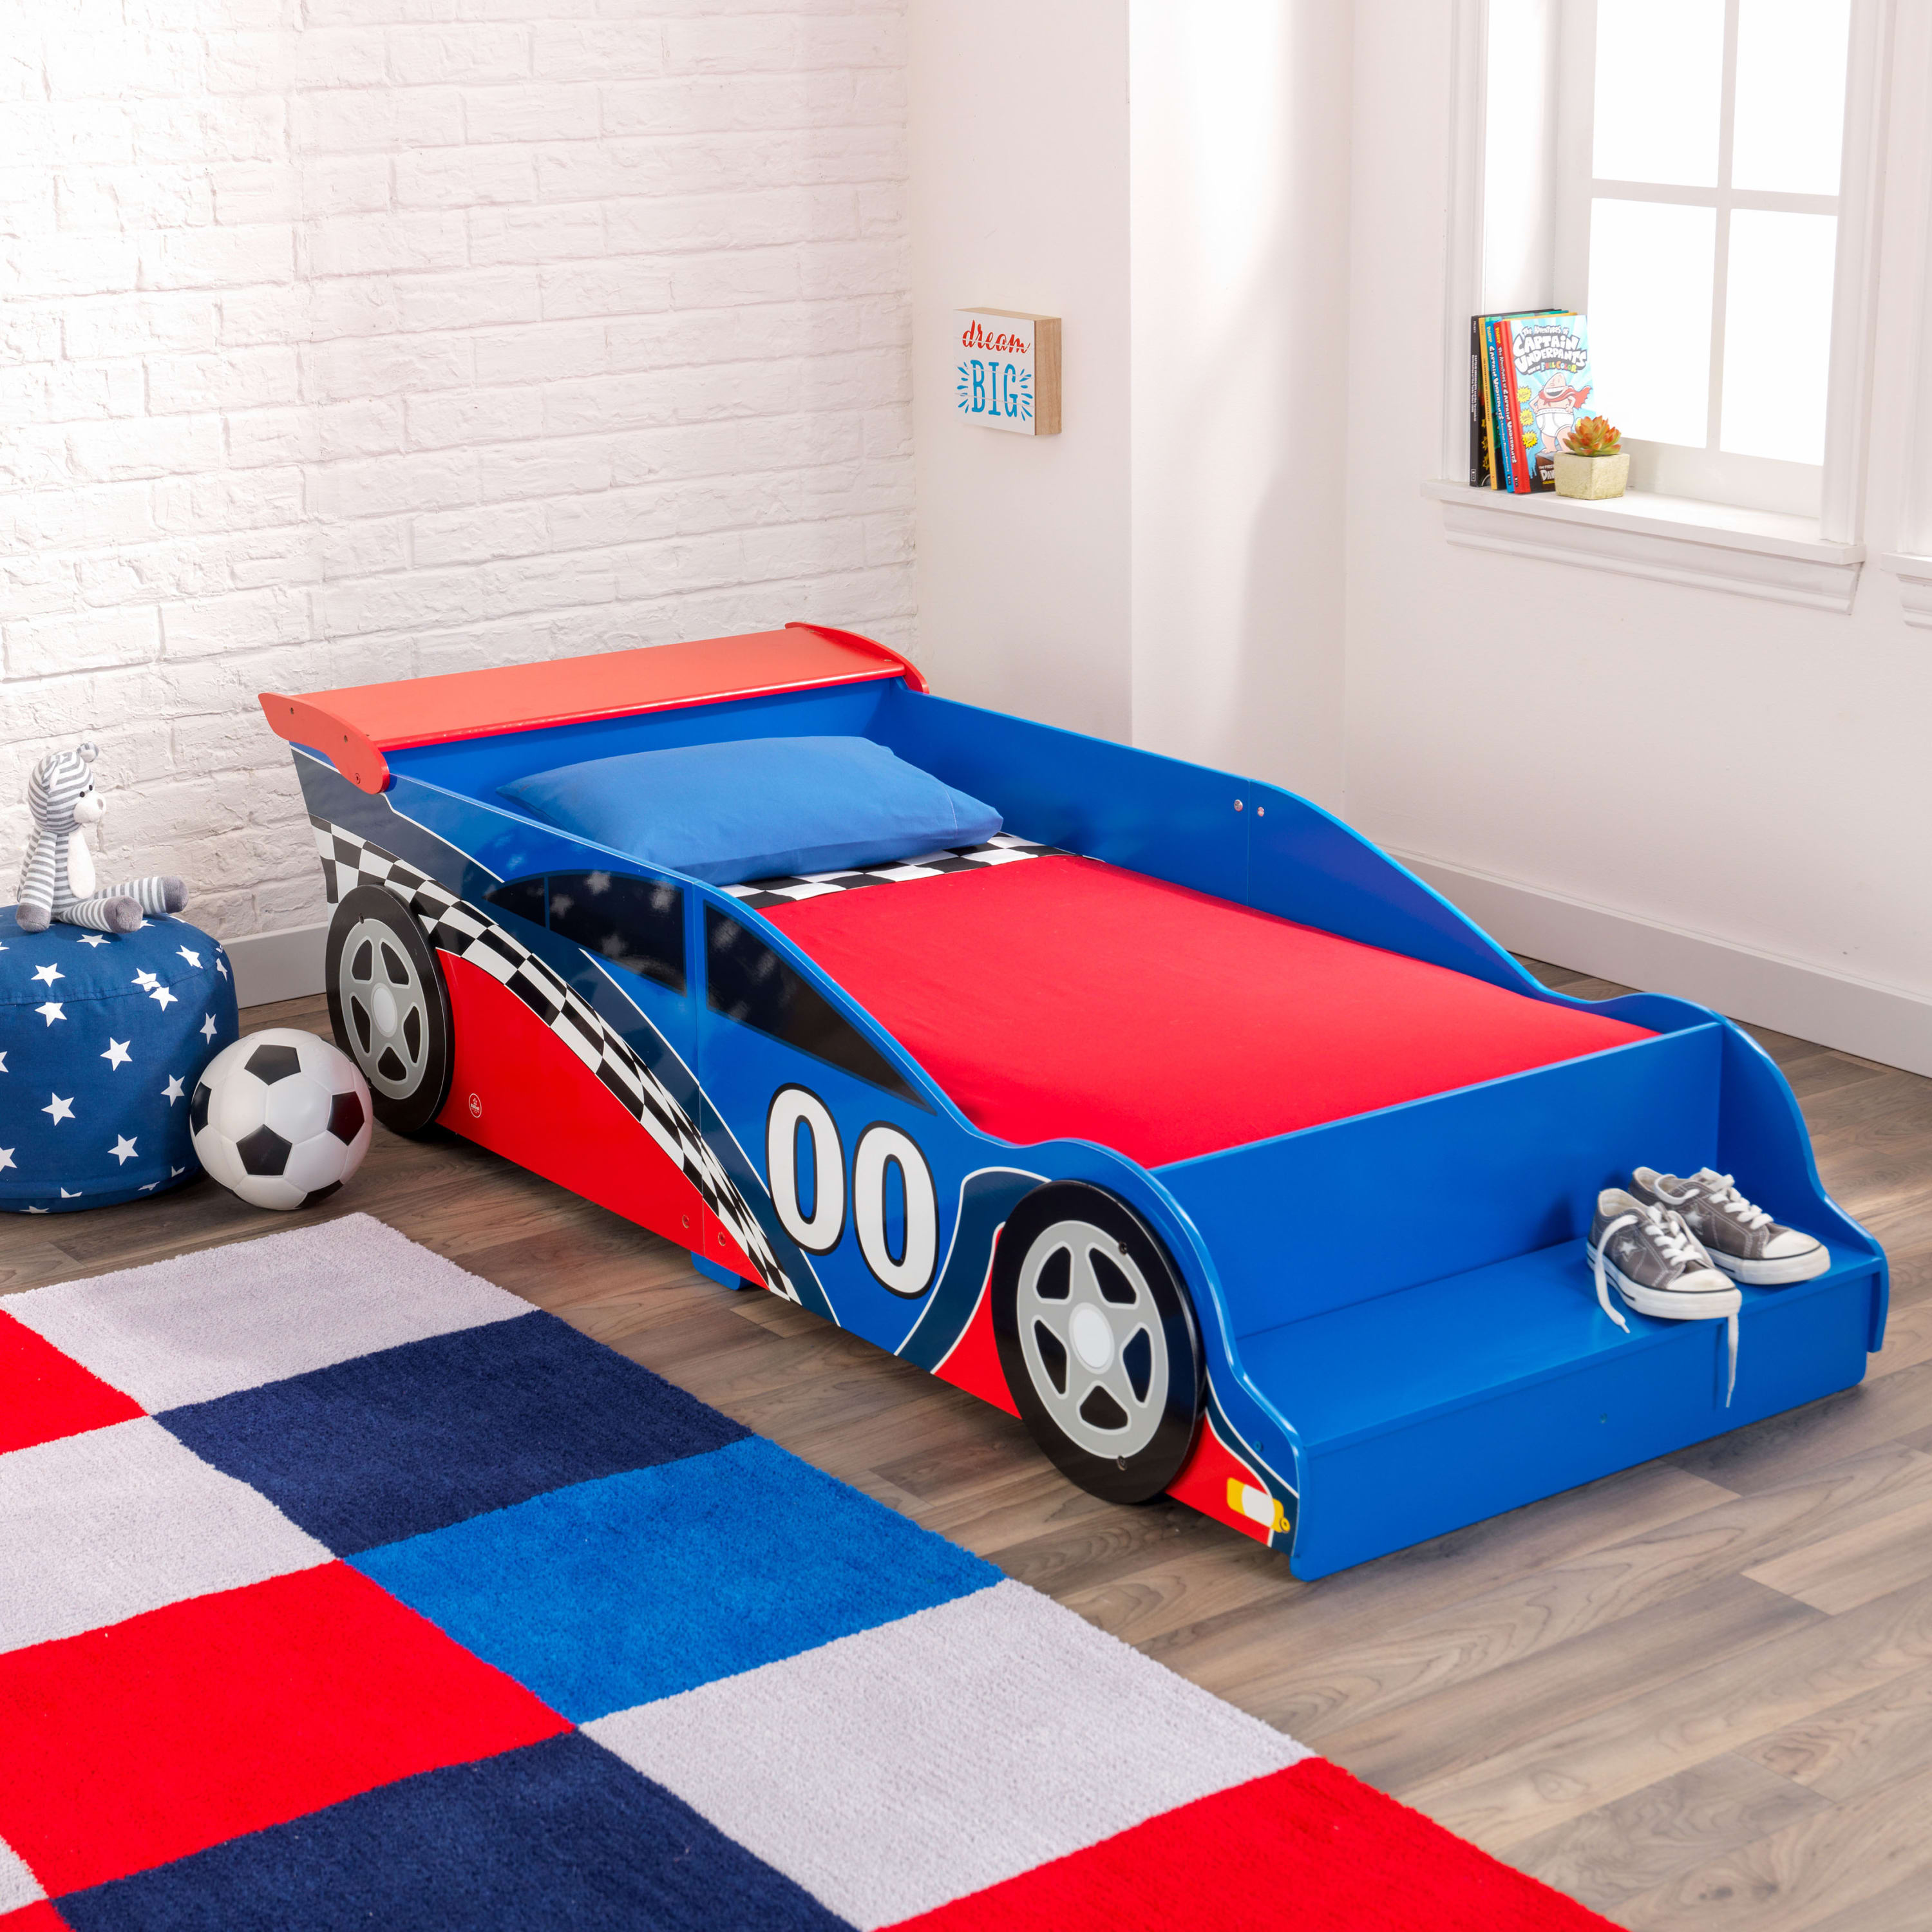 KidKraft Wooden Racecar Toddler Bed with Built-In Bench and Bed Rails - Red and Blue - image 2 of 8